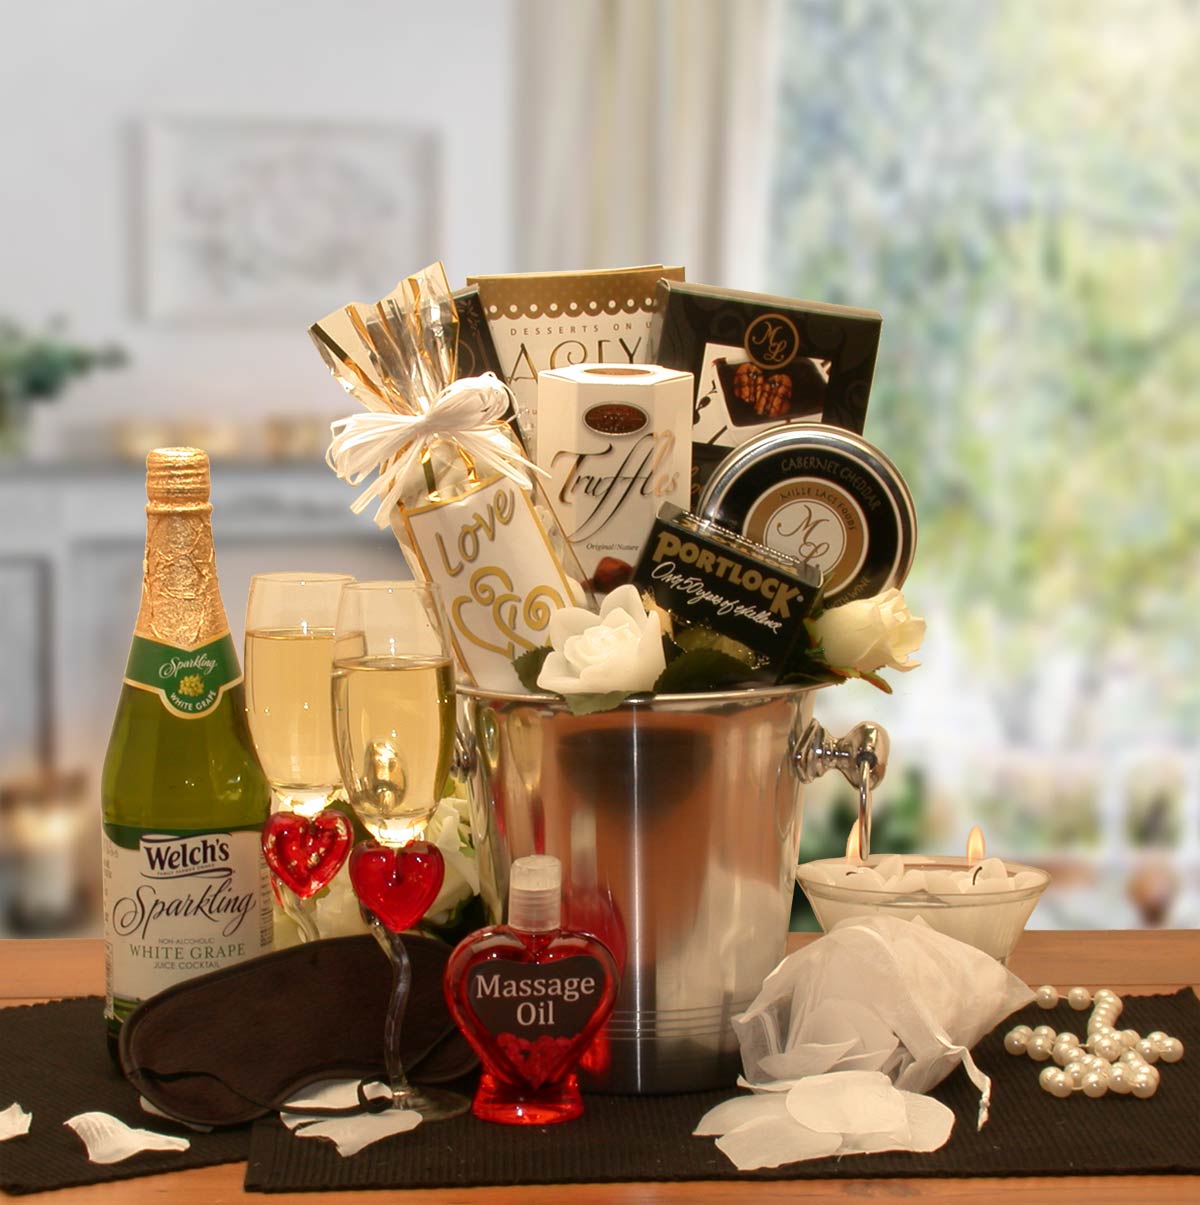 Deluxe Romantic Evening For Two Gift Basket - DB Gift Baskets Deluxe stress relief gift basket for a memorable romantic evening for women or couples.